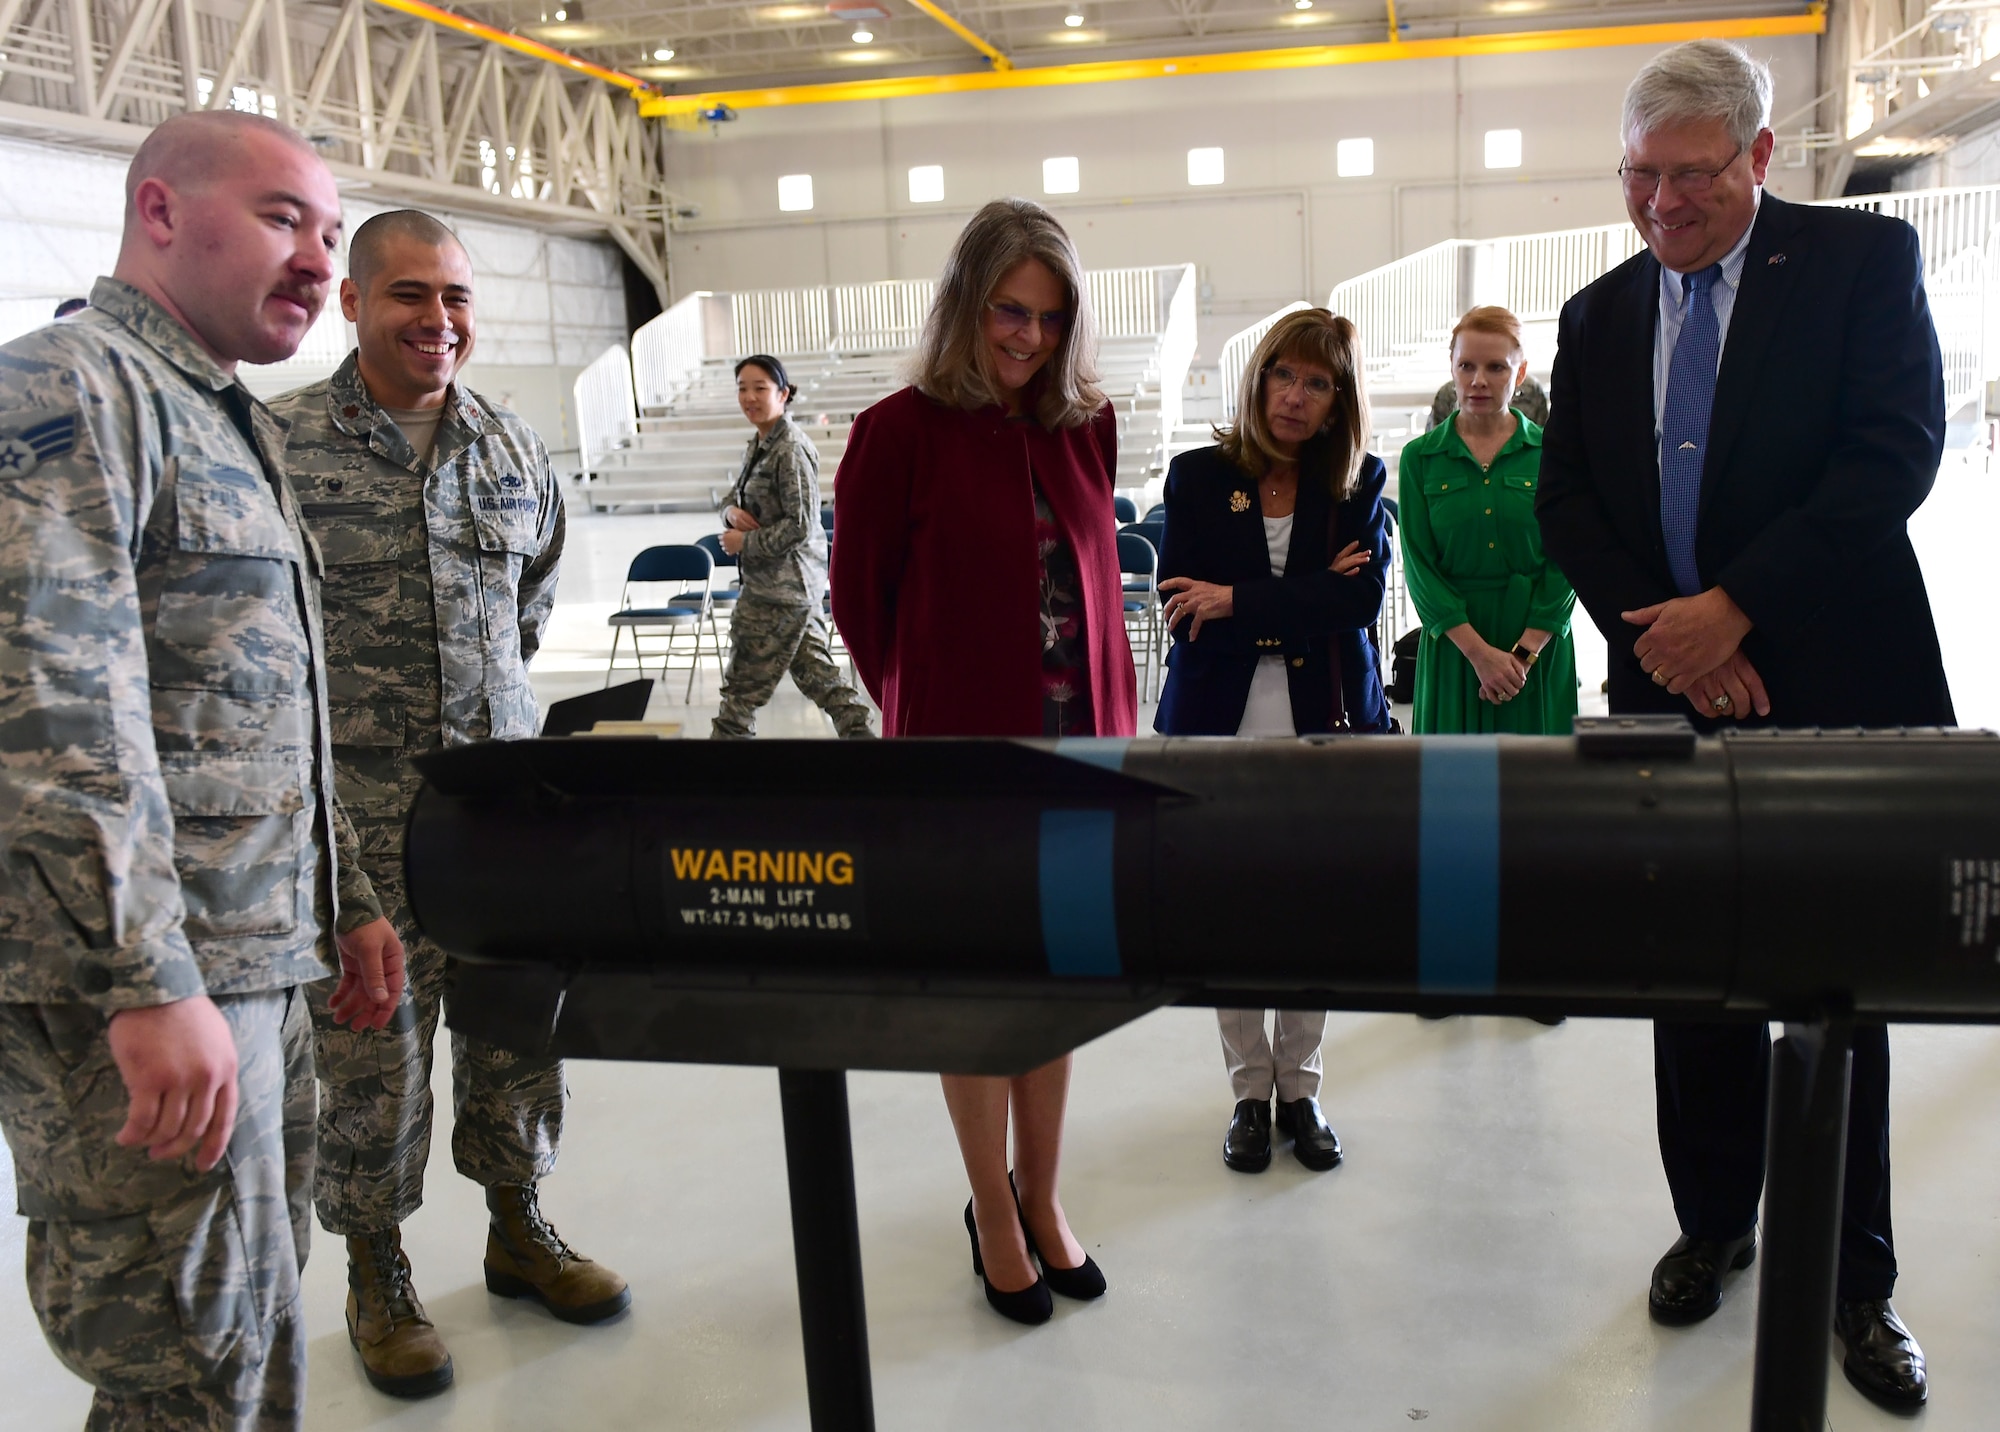 Ms. Jonna Doolittle Hoppes, executive director of the Doolittle Foundation and granddaughter of Gen. James “Jimmy” Doolittle, and retired Lt. Gen. Christopher Miller, president of the Air Force Historical Foundation, look at the inner workings of an AGM-114 Hellfire missile Jan. 18, 2018. During their visit, Doolittle Hoppes and Miller received an in depth look at the Remotely Piloted Aircraft mission before presenting the General James H. “Jimmy” Doolittle award to the 432nd Wing/432nd Air Expeditionary Wing. (U.S. Air Force photo/Senior Airman Christian Clausen)